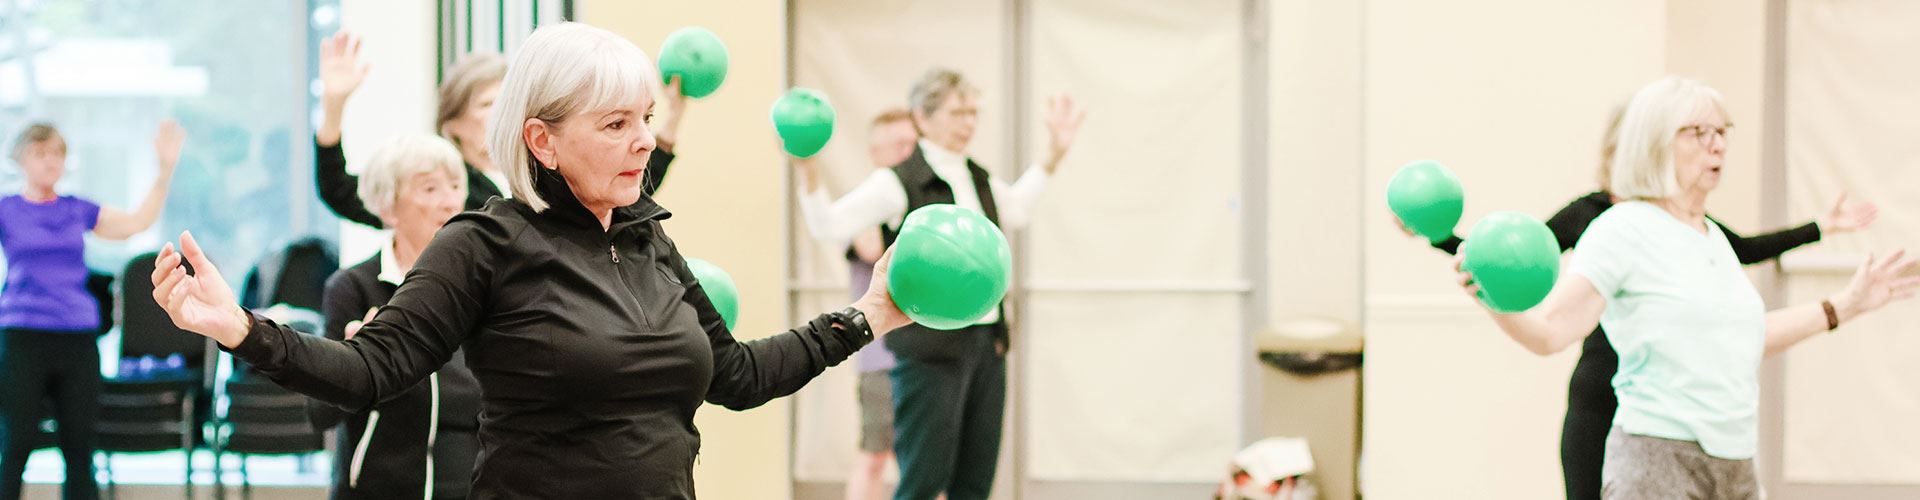 participants in exercise class holding green ball